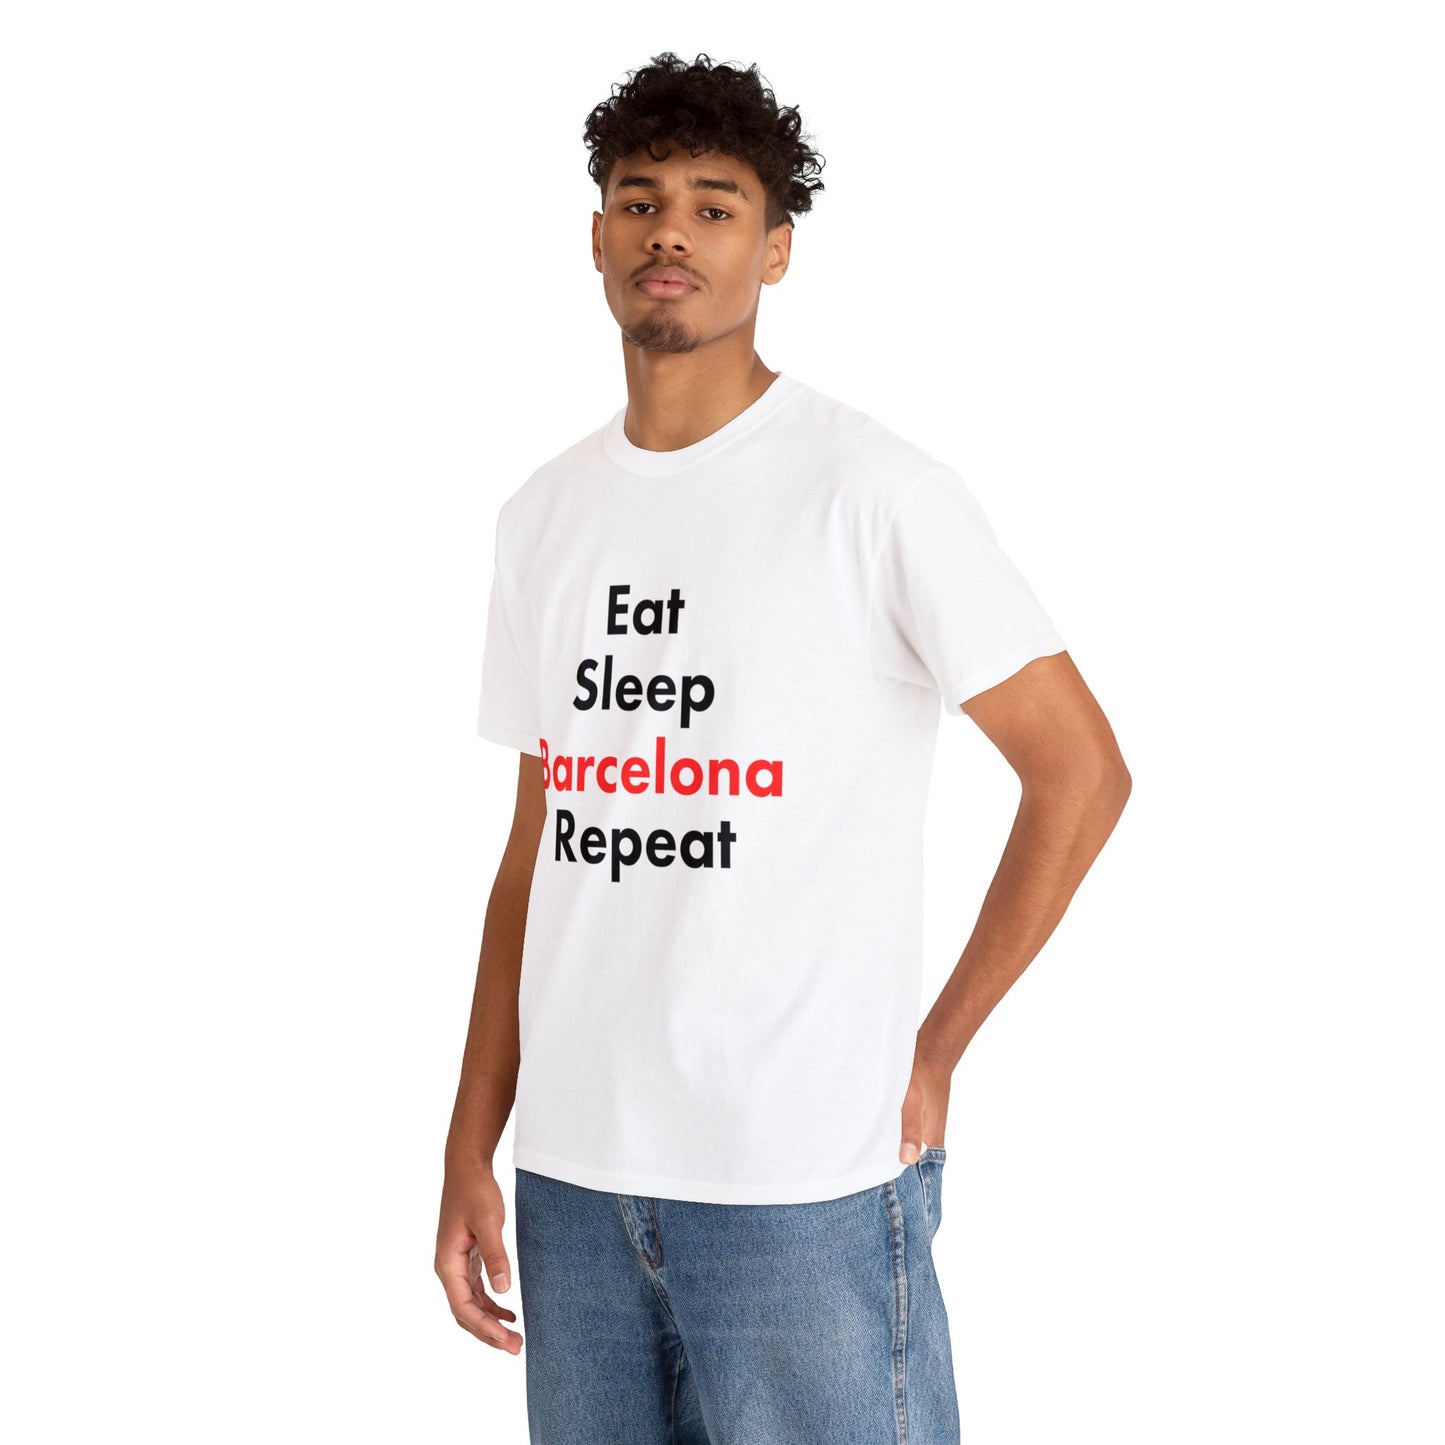 “Eat, Sleep, Barcelona, Repeat” Text T-shirt Unisex Heavy Cotton Tee Simple Text for Travelers